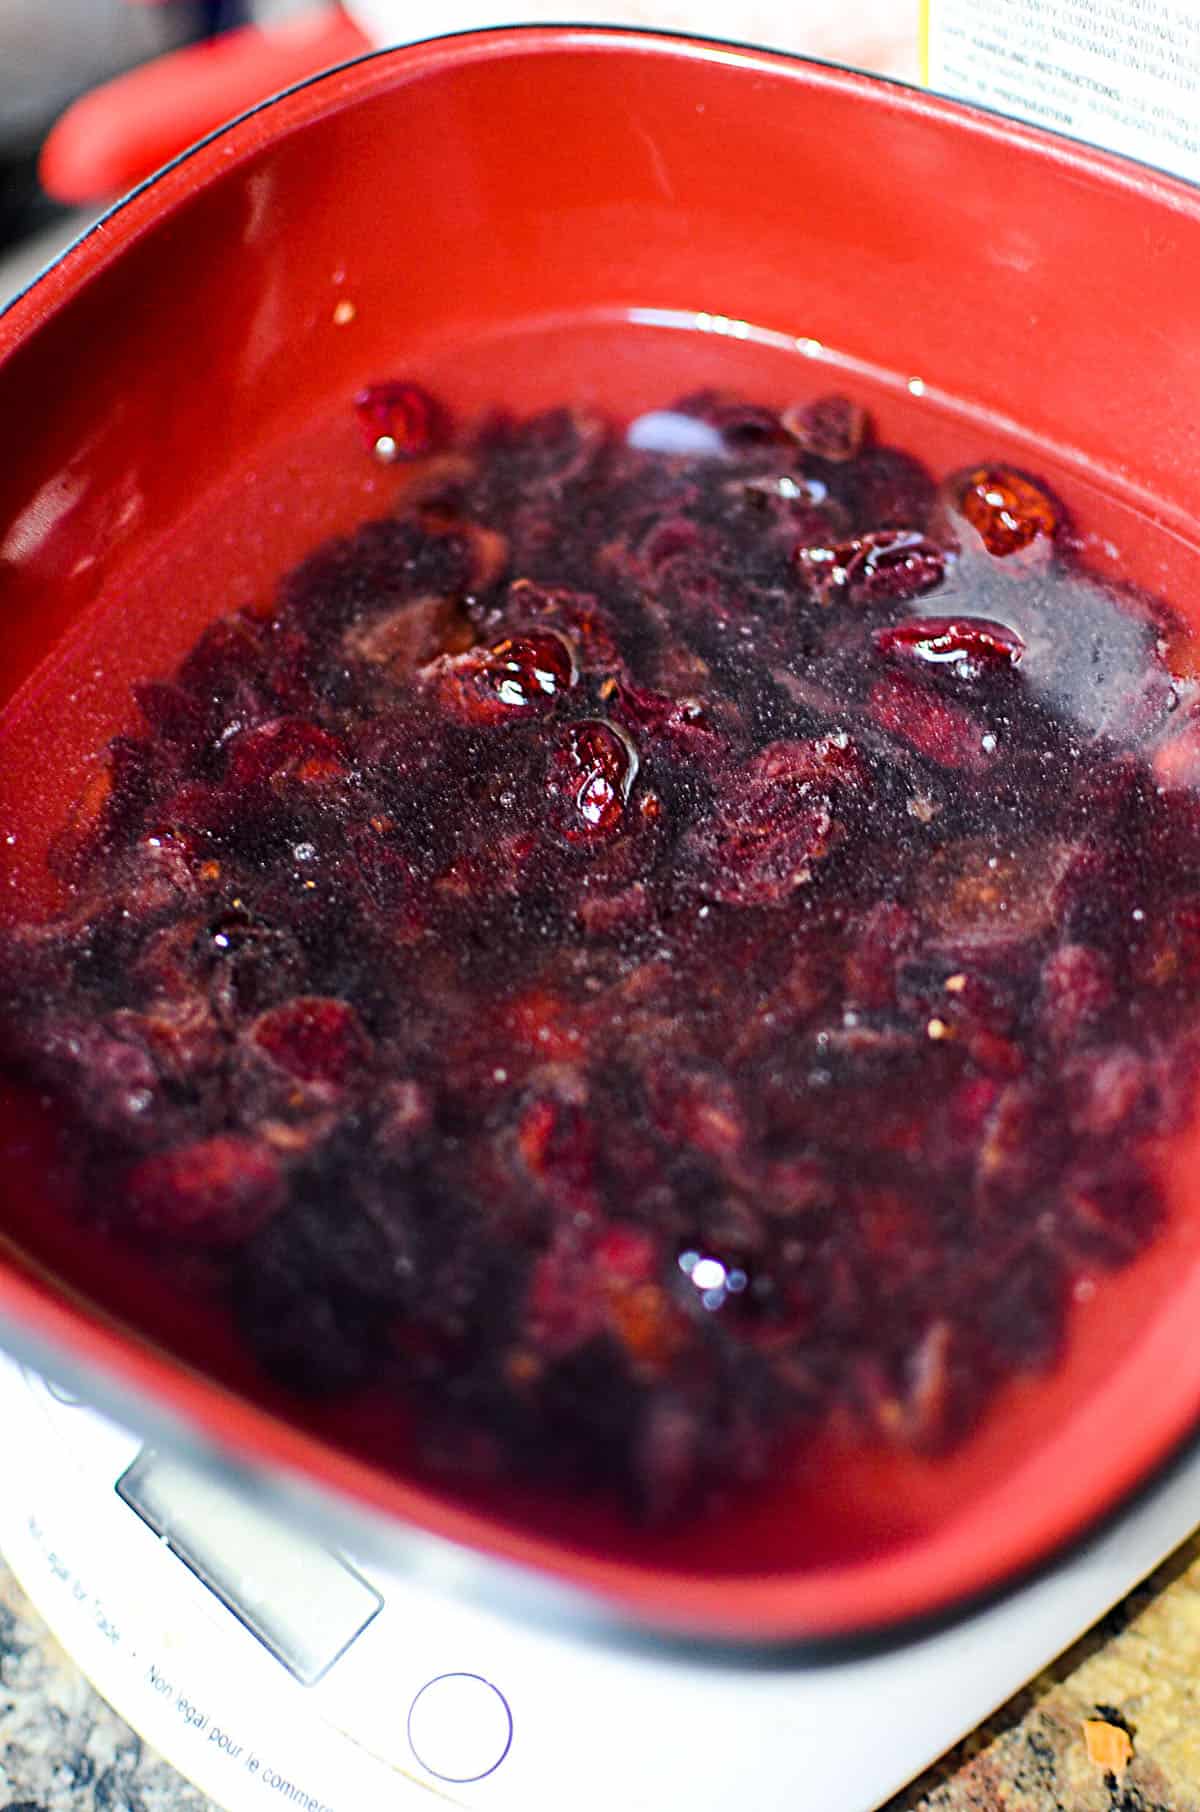 Rehydrating dried cranberries in water, in a red bowl.